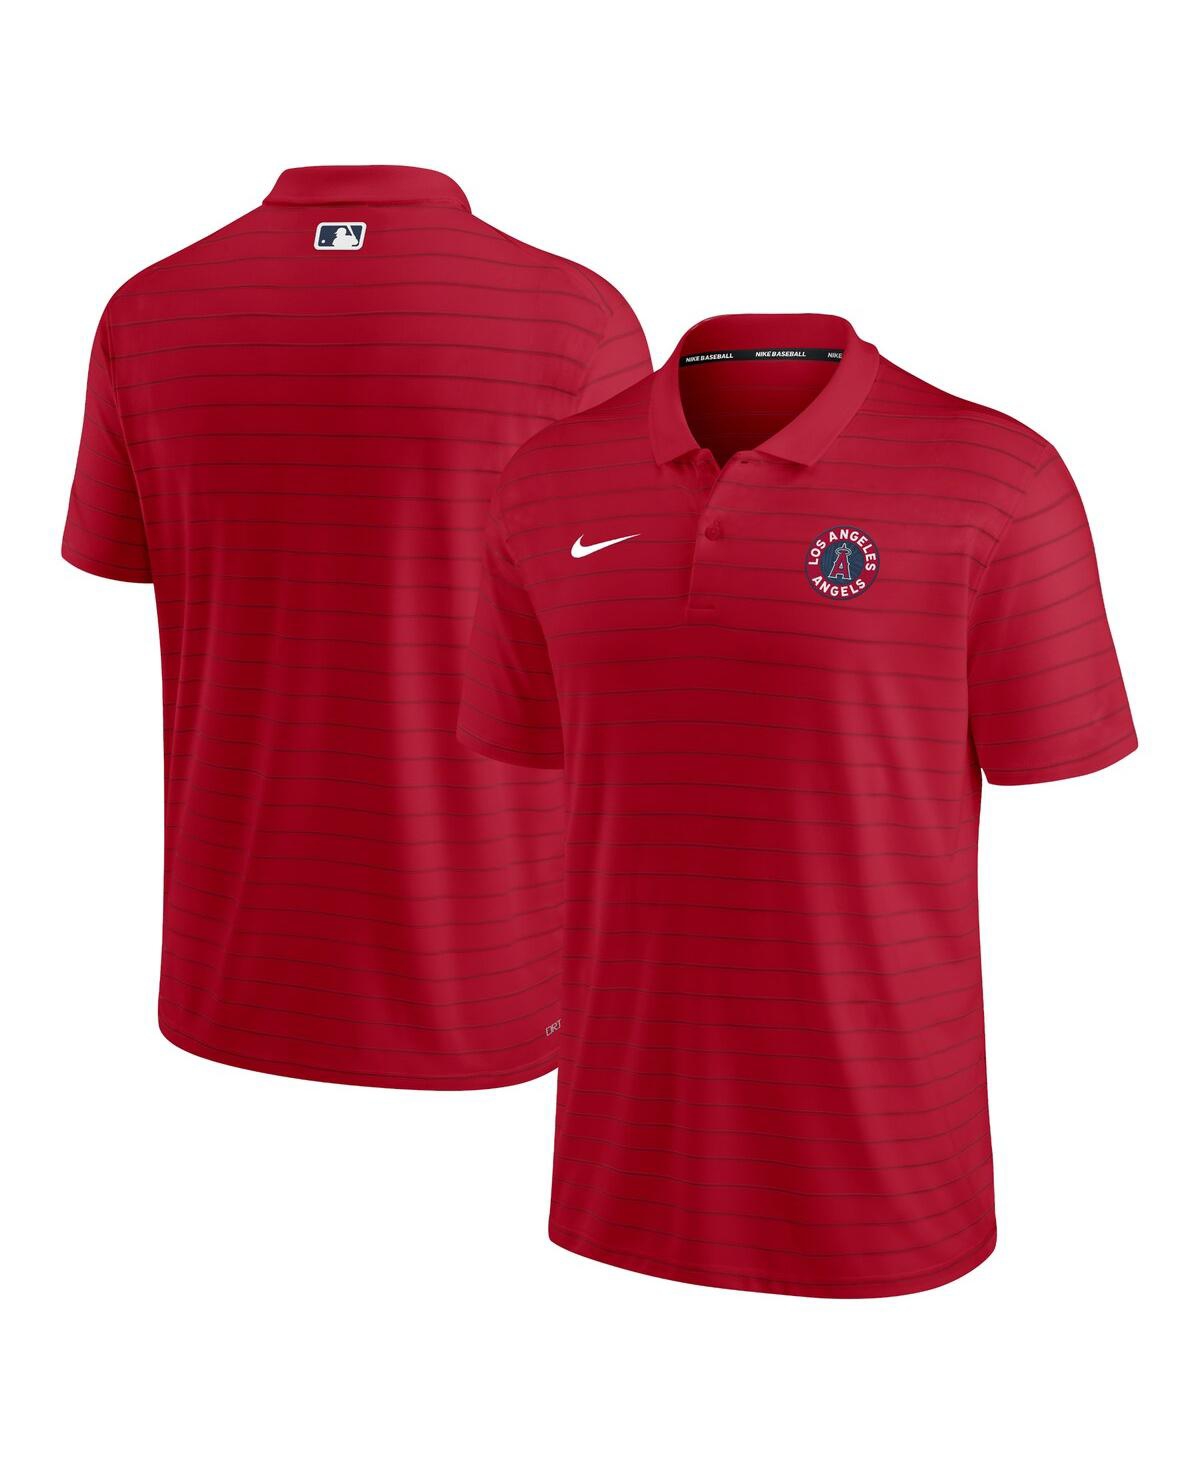 NIKE MEN'S NIKE RED LOS ANGELES ANGELS CITY CONNECT STRIPED PERFORMANCE POLO SHIRT